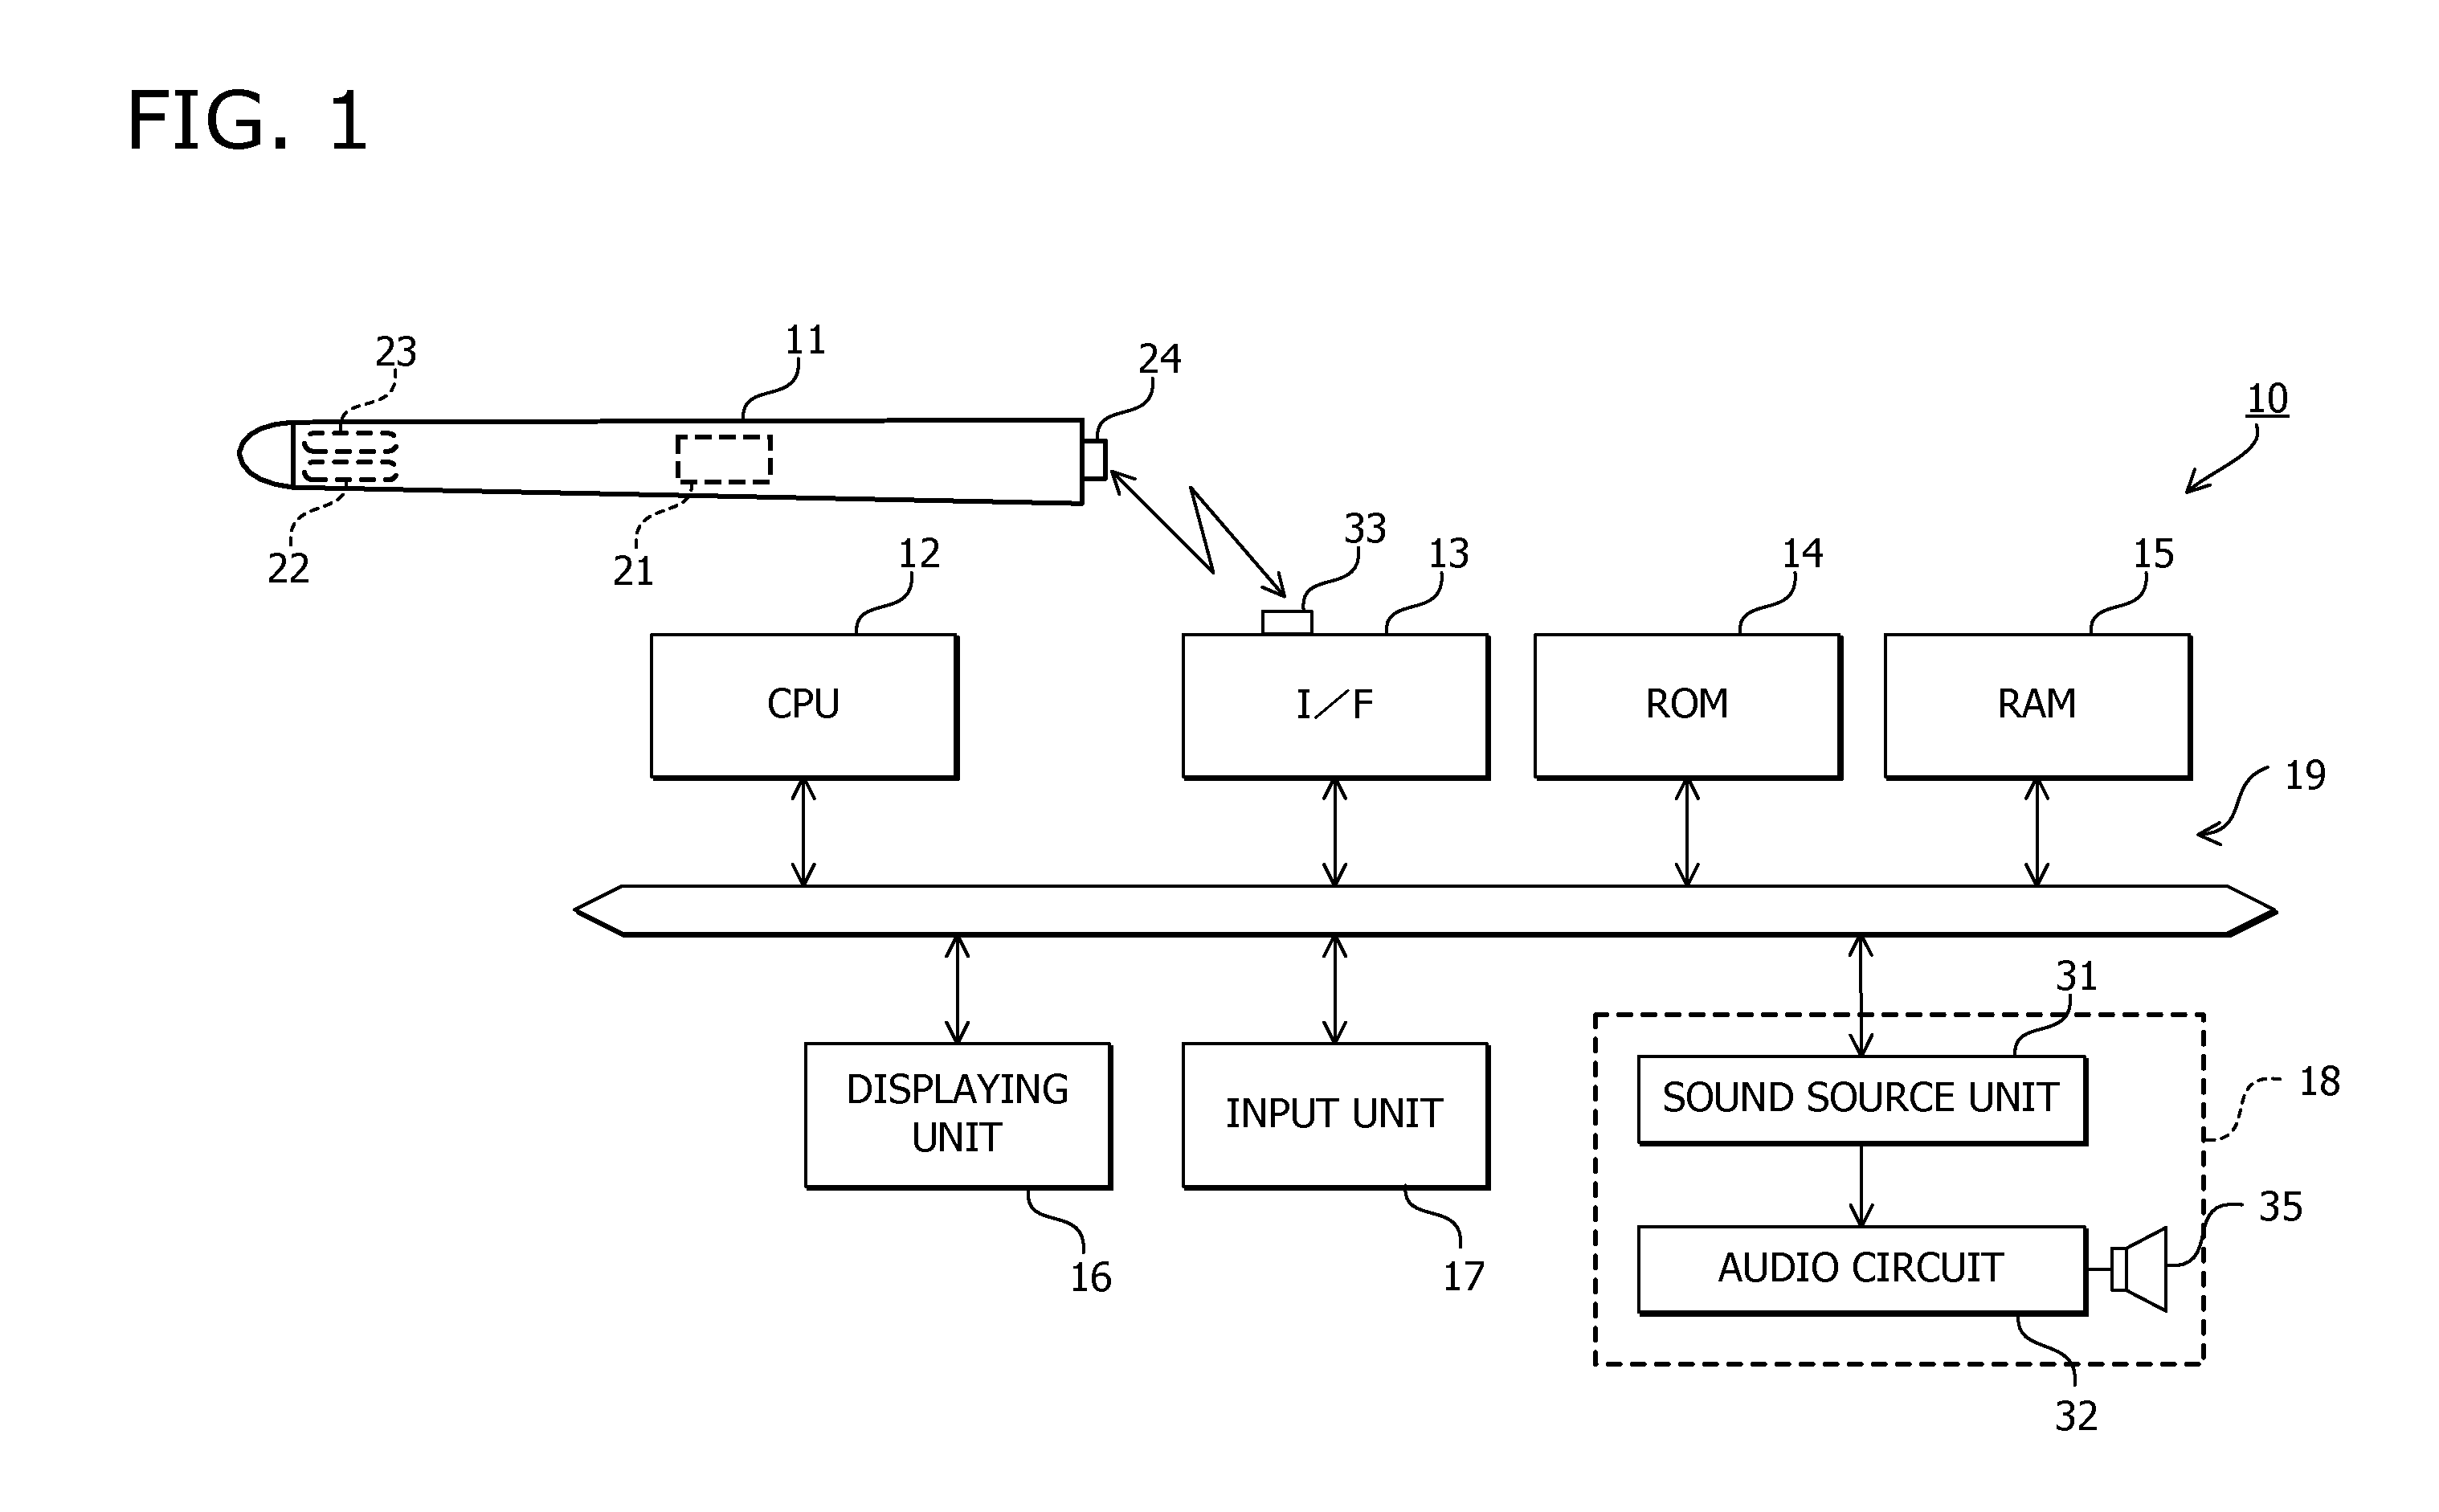 Performance apparatus and electronic musical instrument